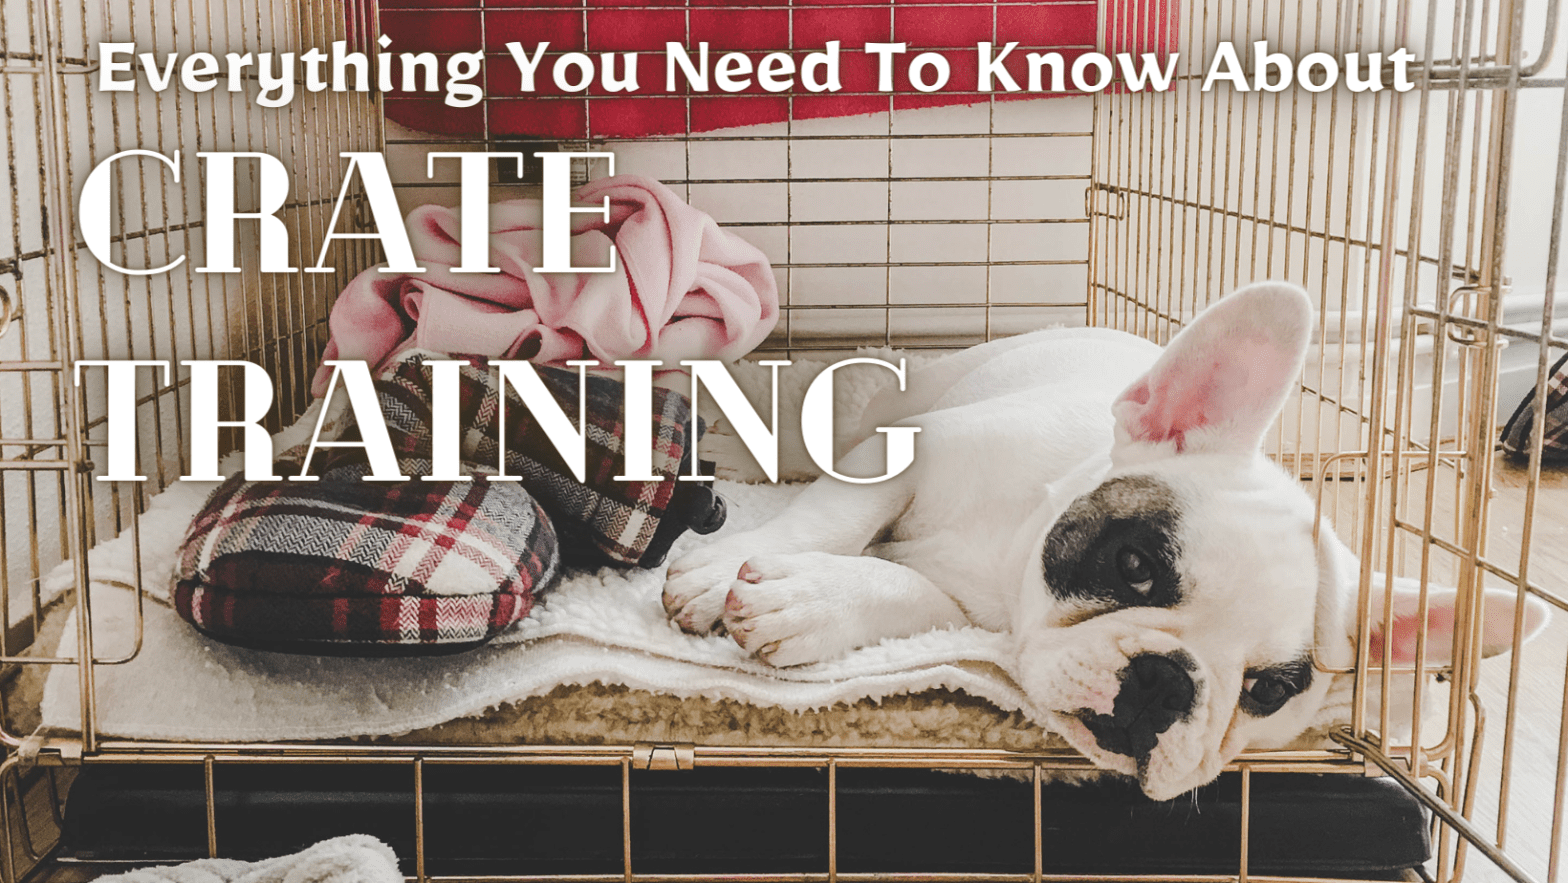 What Is Puppy Crate Training - How Do I Crate Train My Puppy - Complete Guide To Crate Training My Puppy